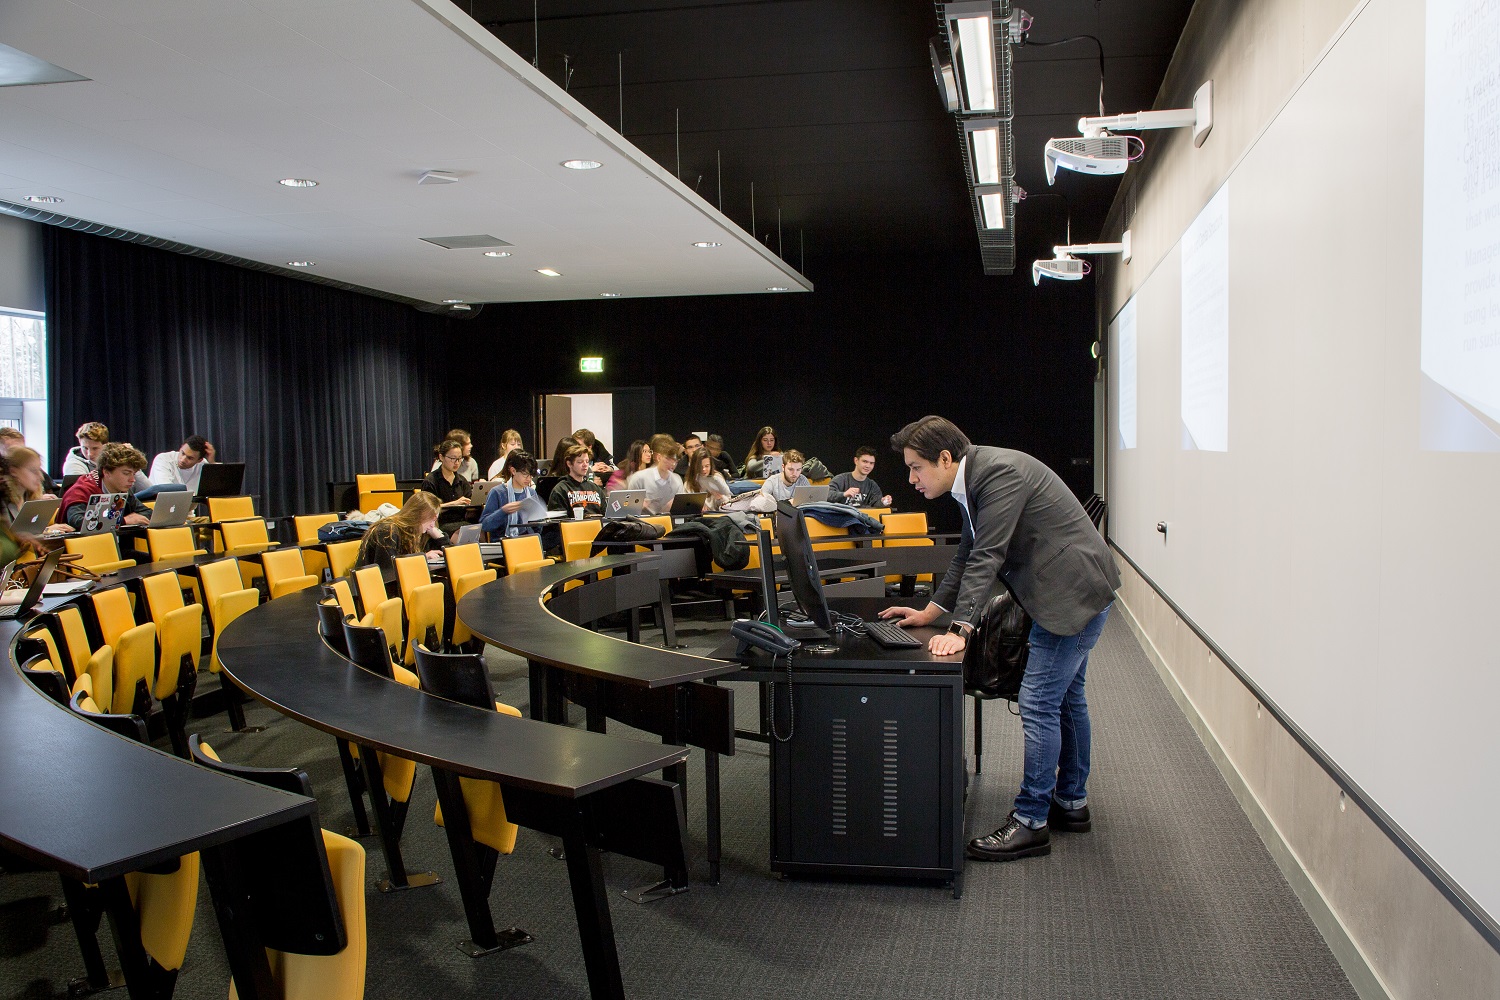 Auditorium with a 12-metre wide MULTIWALL combined with several video projectors.